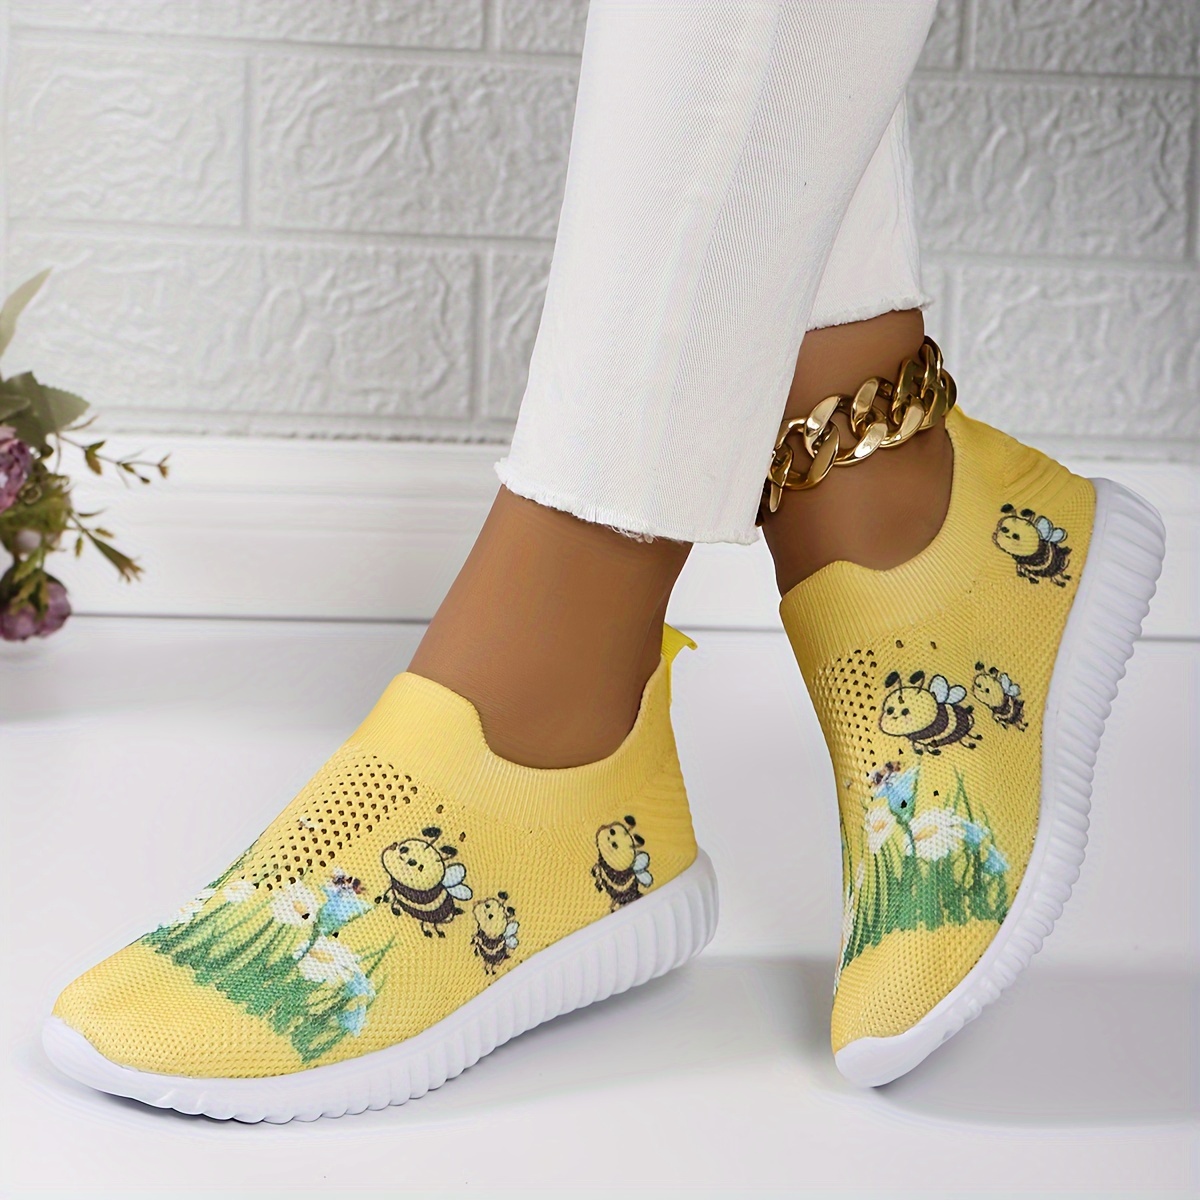 

Women's Cartoon Bee & Floral Pattern Sock Sneakers, Stylish Low Top Slip On Knitted Trainers, Comfy Breathable Walking Shoes